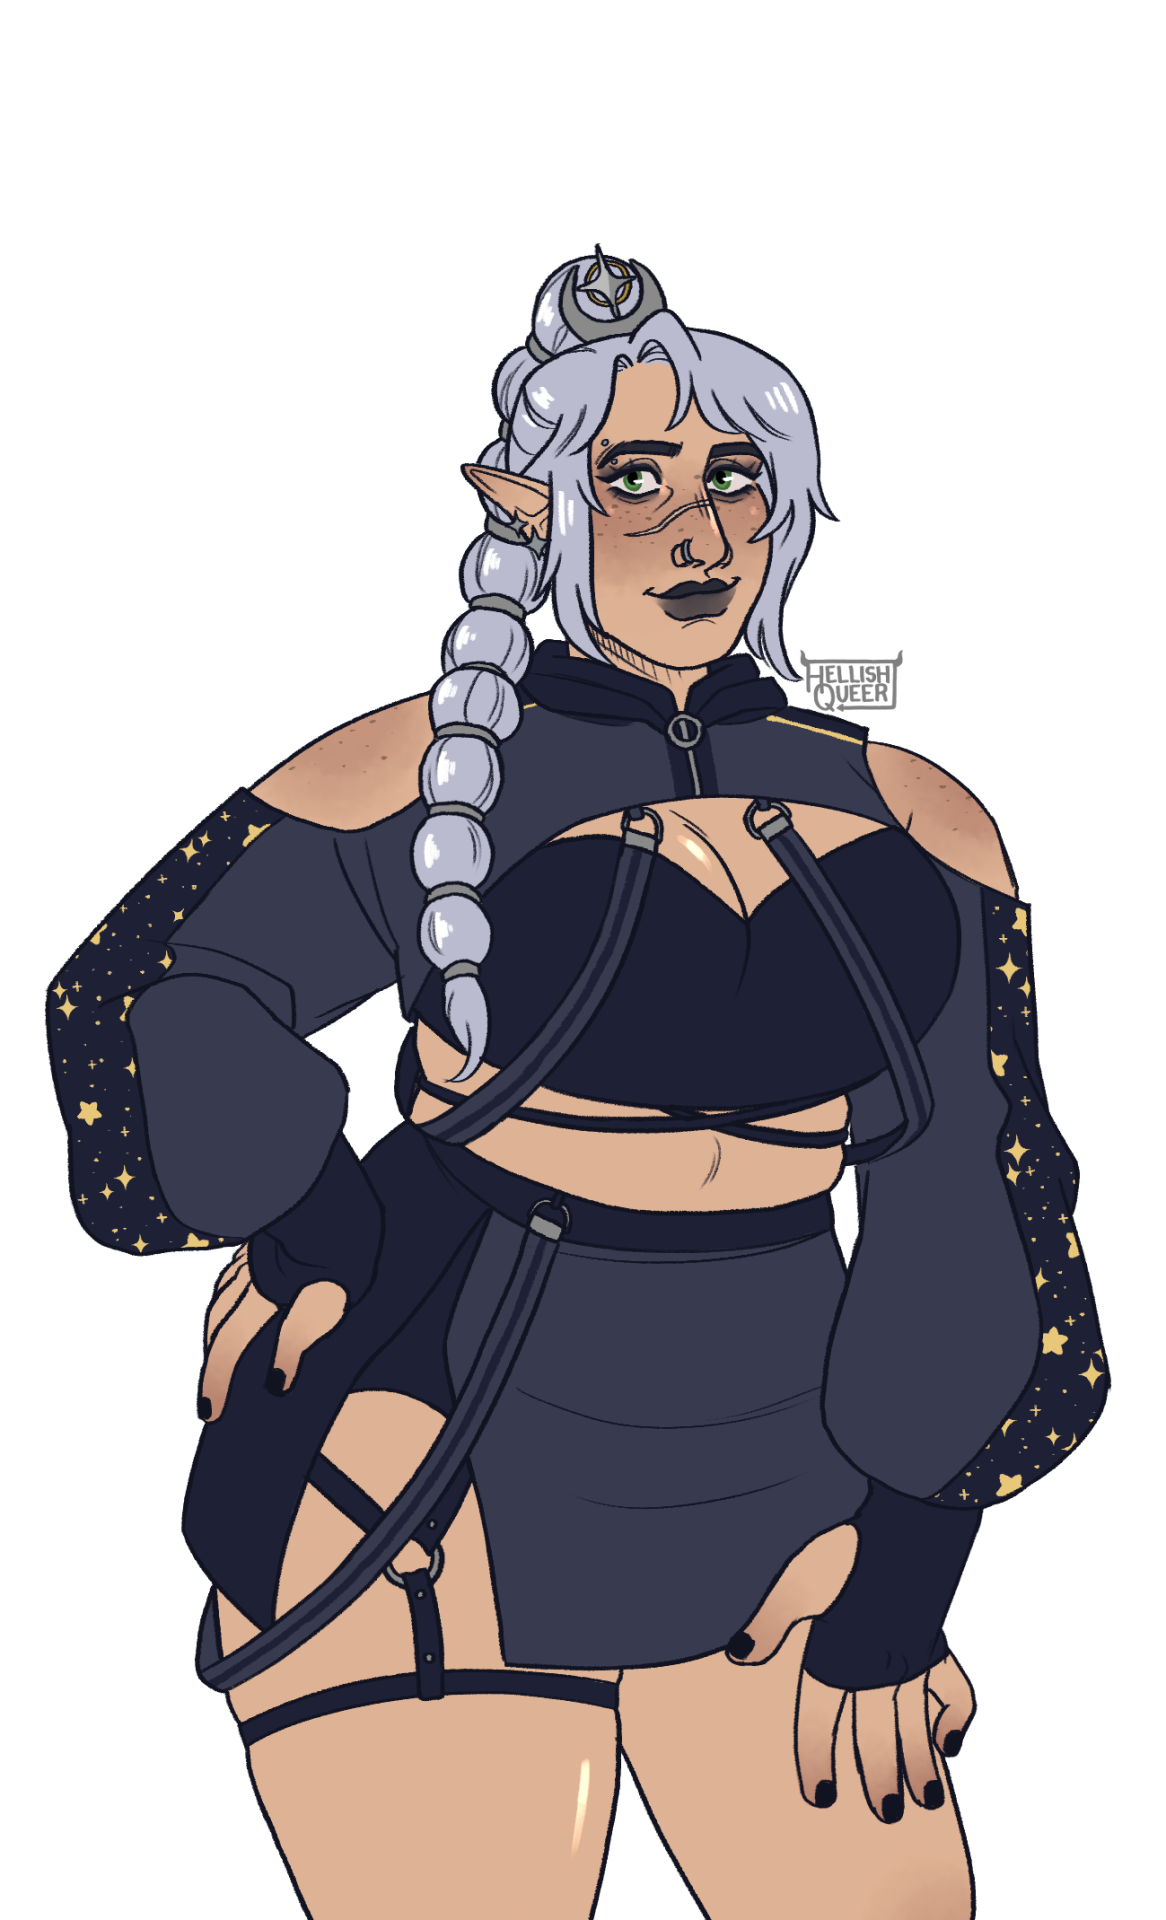 Shadowheart with a hand on her hip and another placed lightly on her thigh. She has white hair, black lipstick and eyeshadow, and a piercings. She is wearing a cropped hoodie that hangs off her shoulders, a crop top, and a short split skirt with a leather thigh garter.